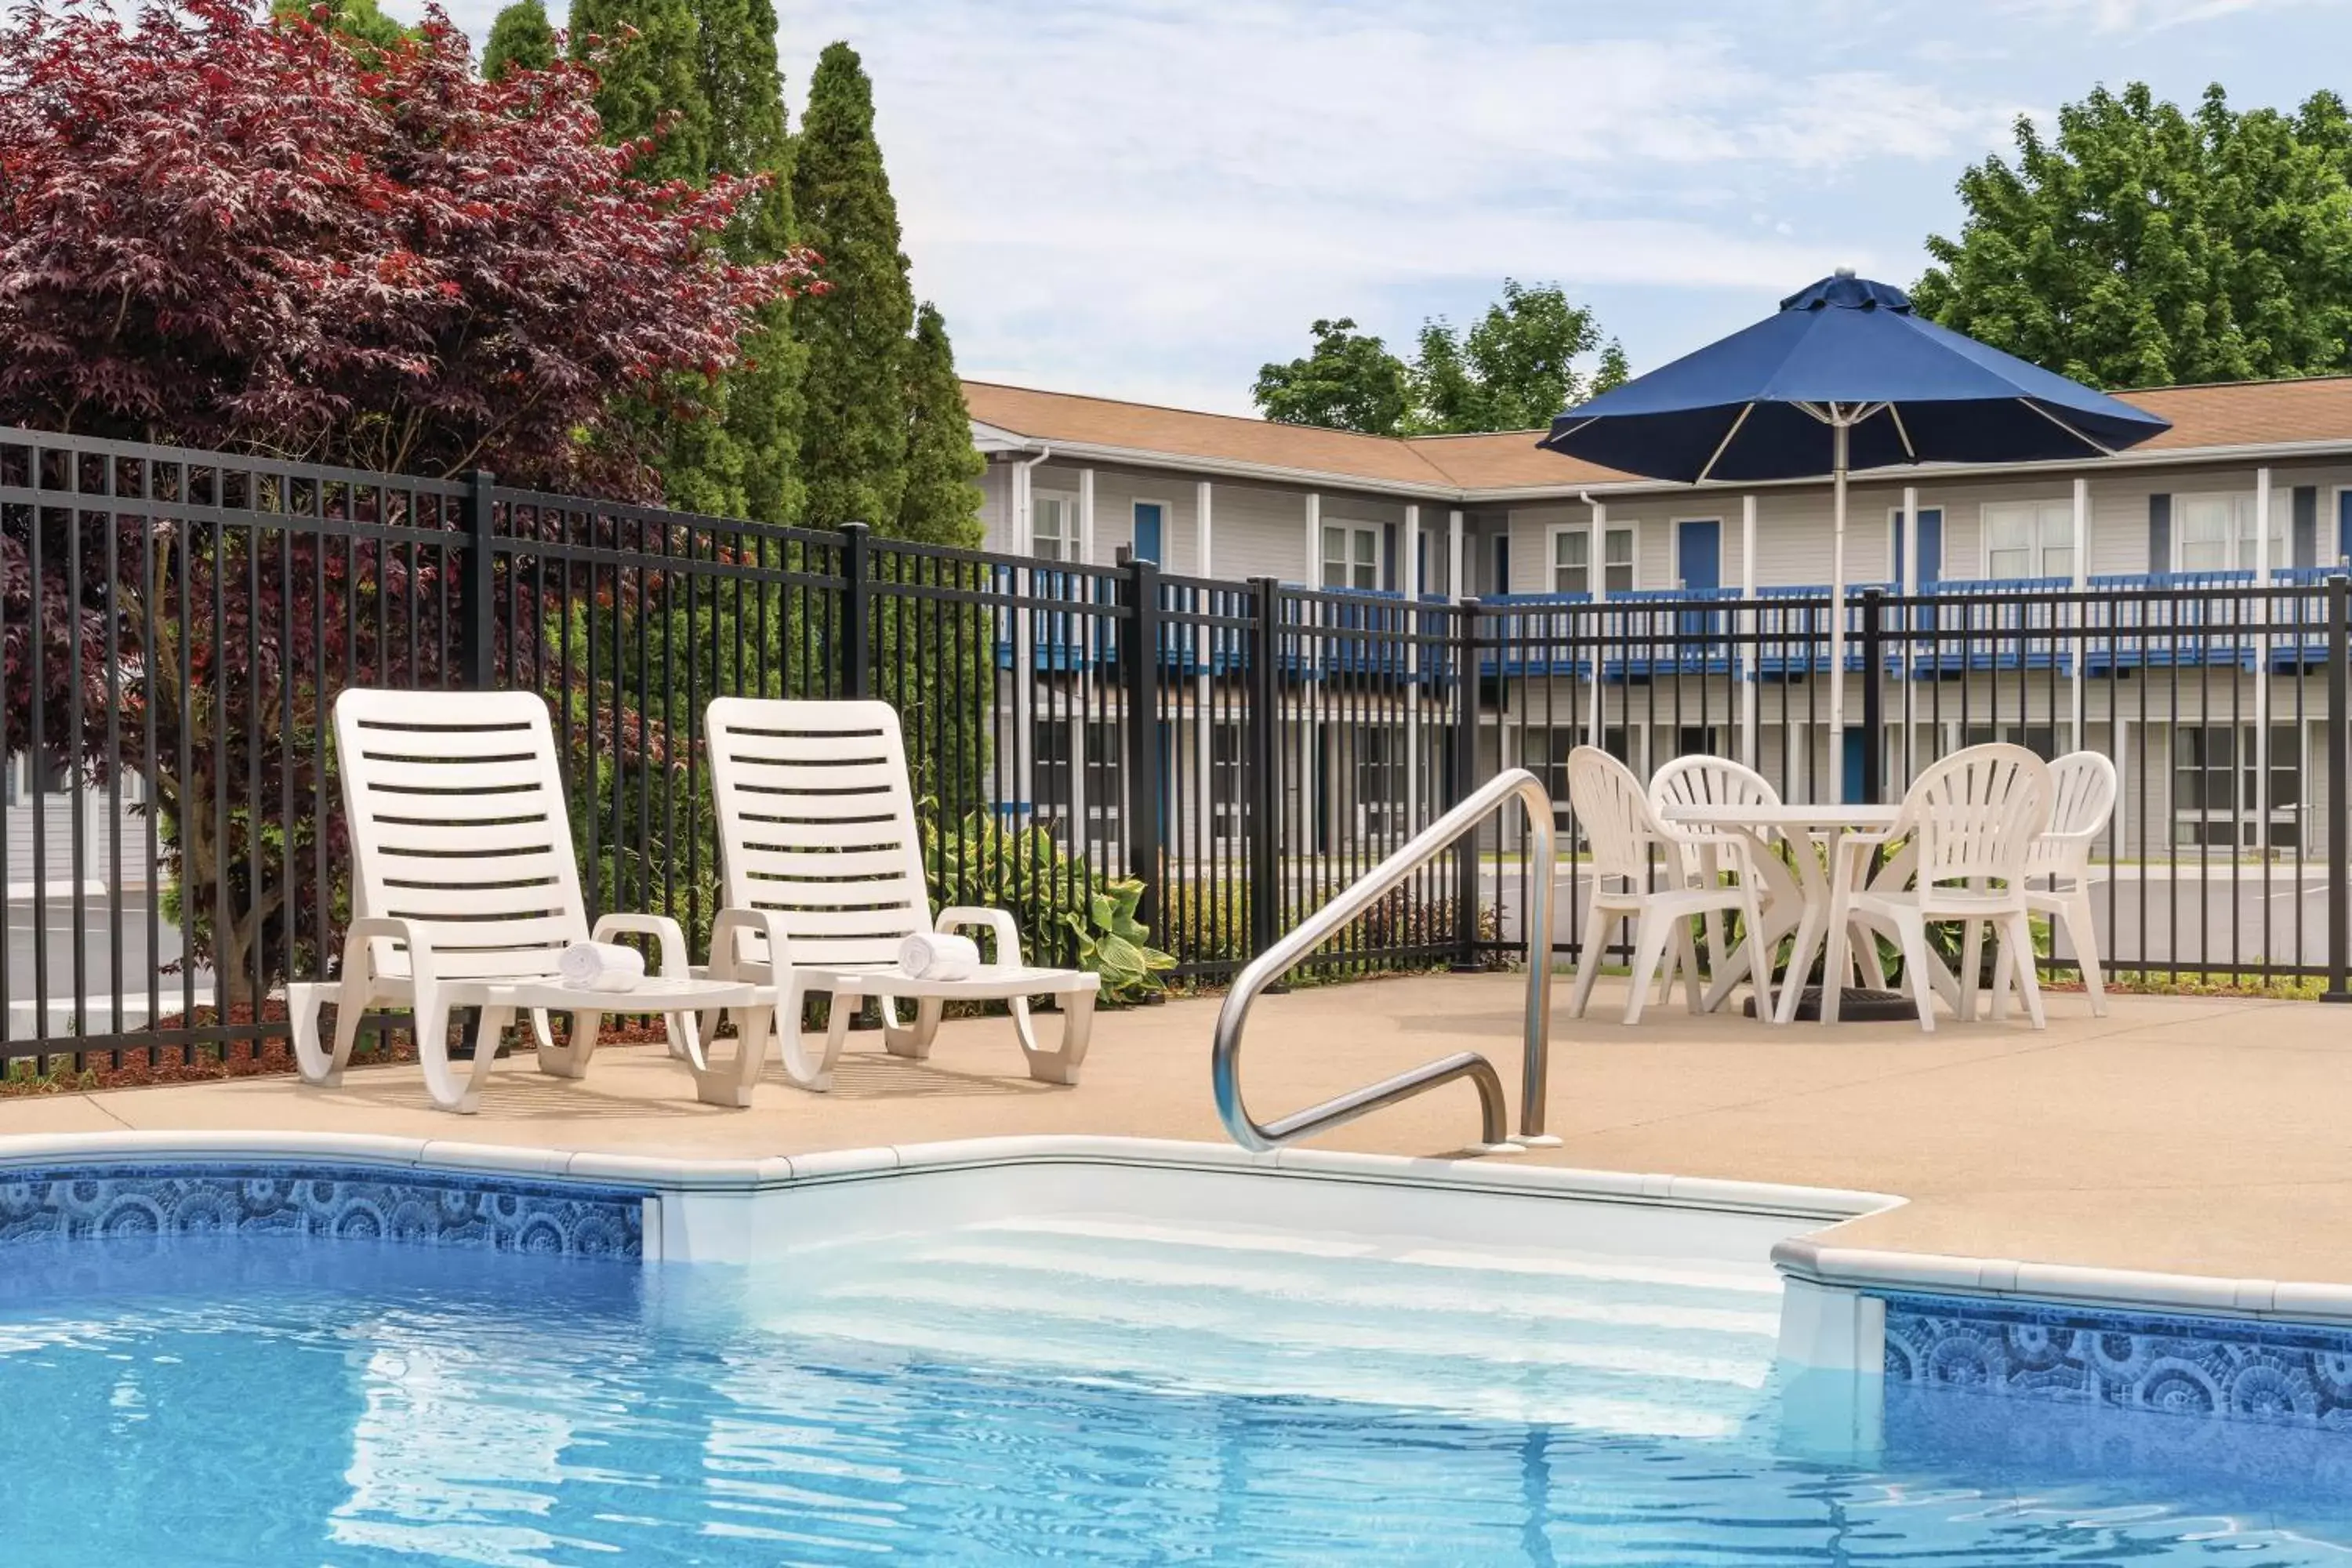 Property building, Swimming Pool in Days Inn by Wyndham Middletown/Newport Area